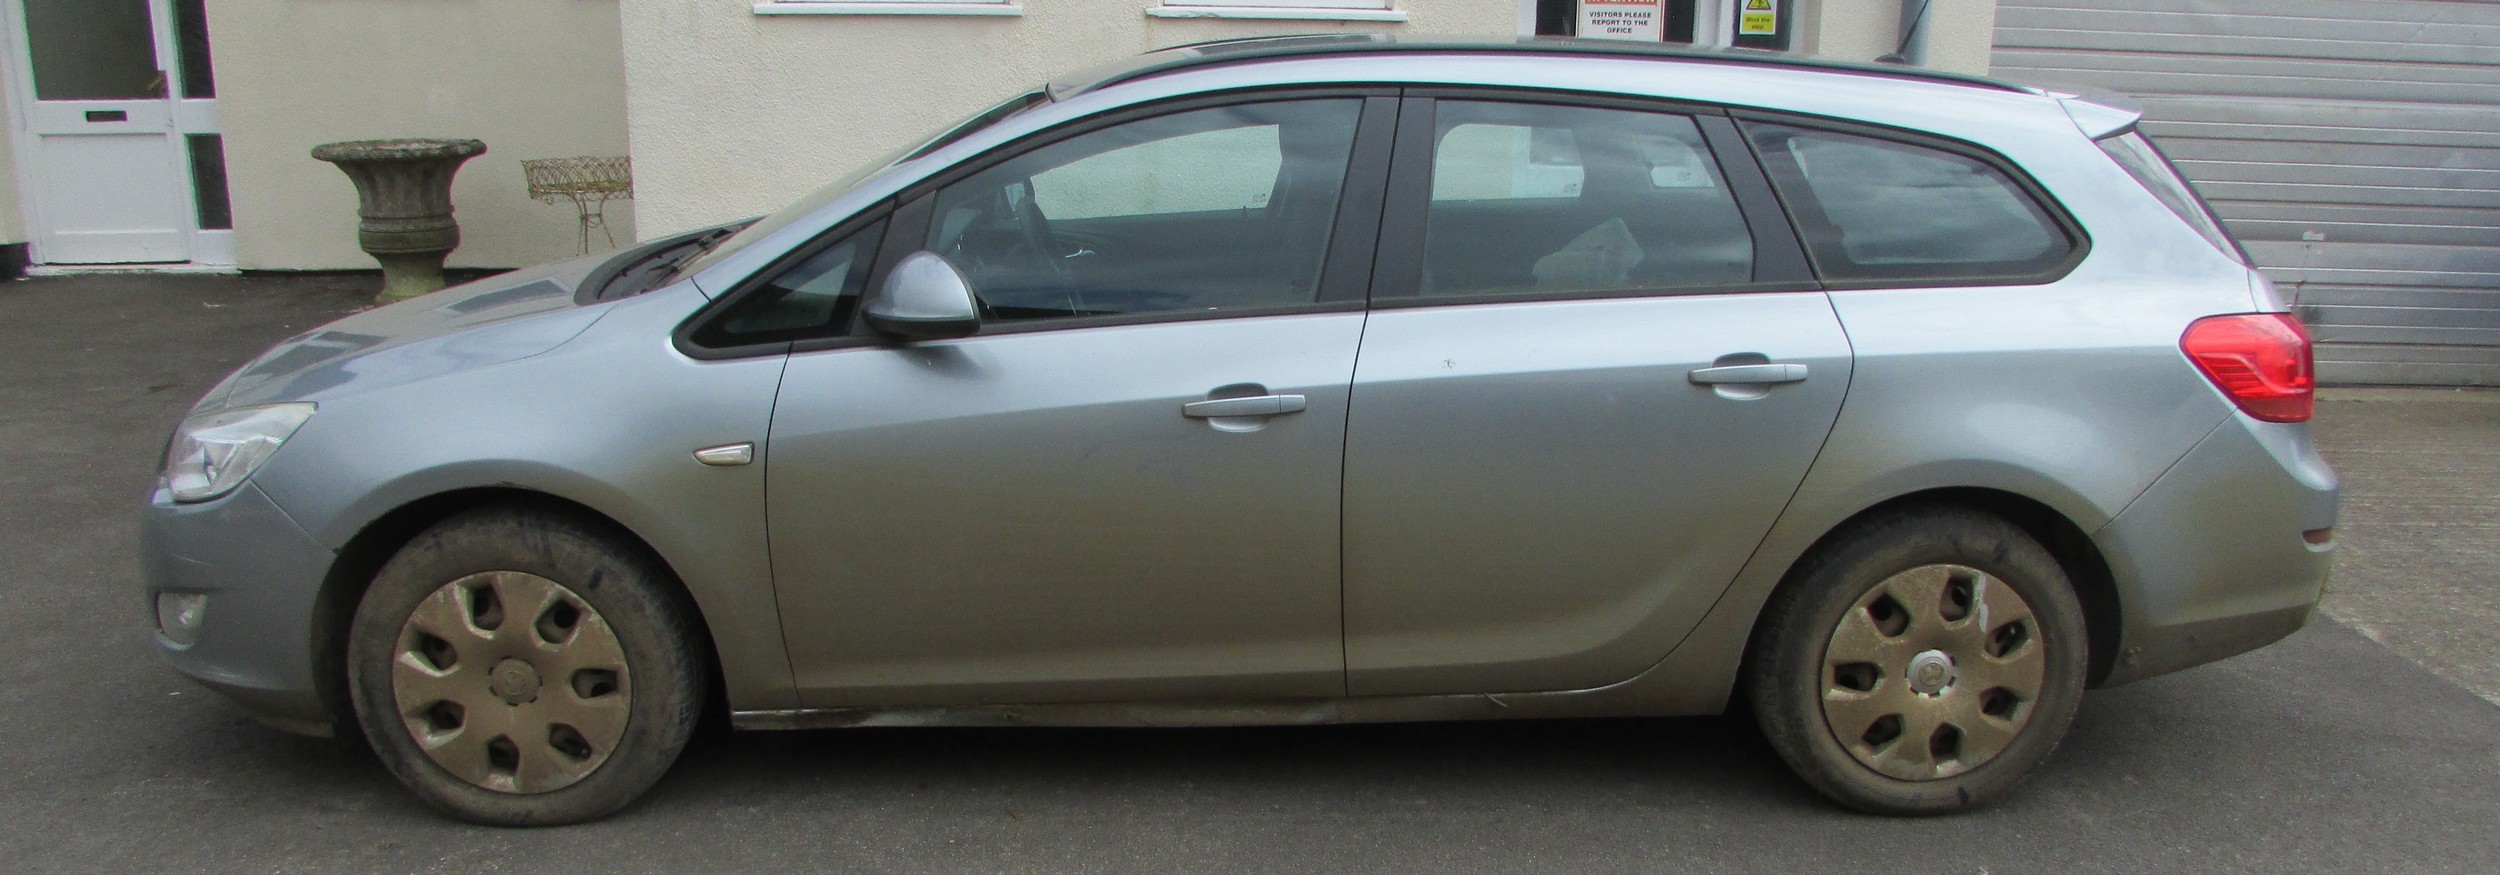 Astra 1.6 Exclusive Estate, petrol, 1598cc, silver, WU12 TNF, manual, first reg. March 2012, same - Image 2 of 13